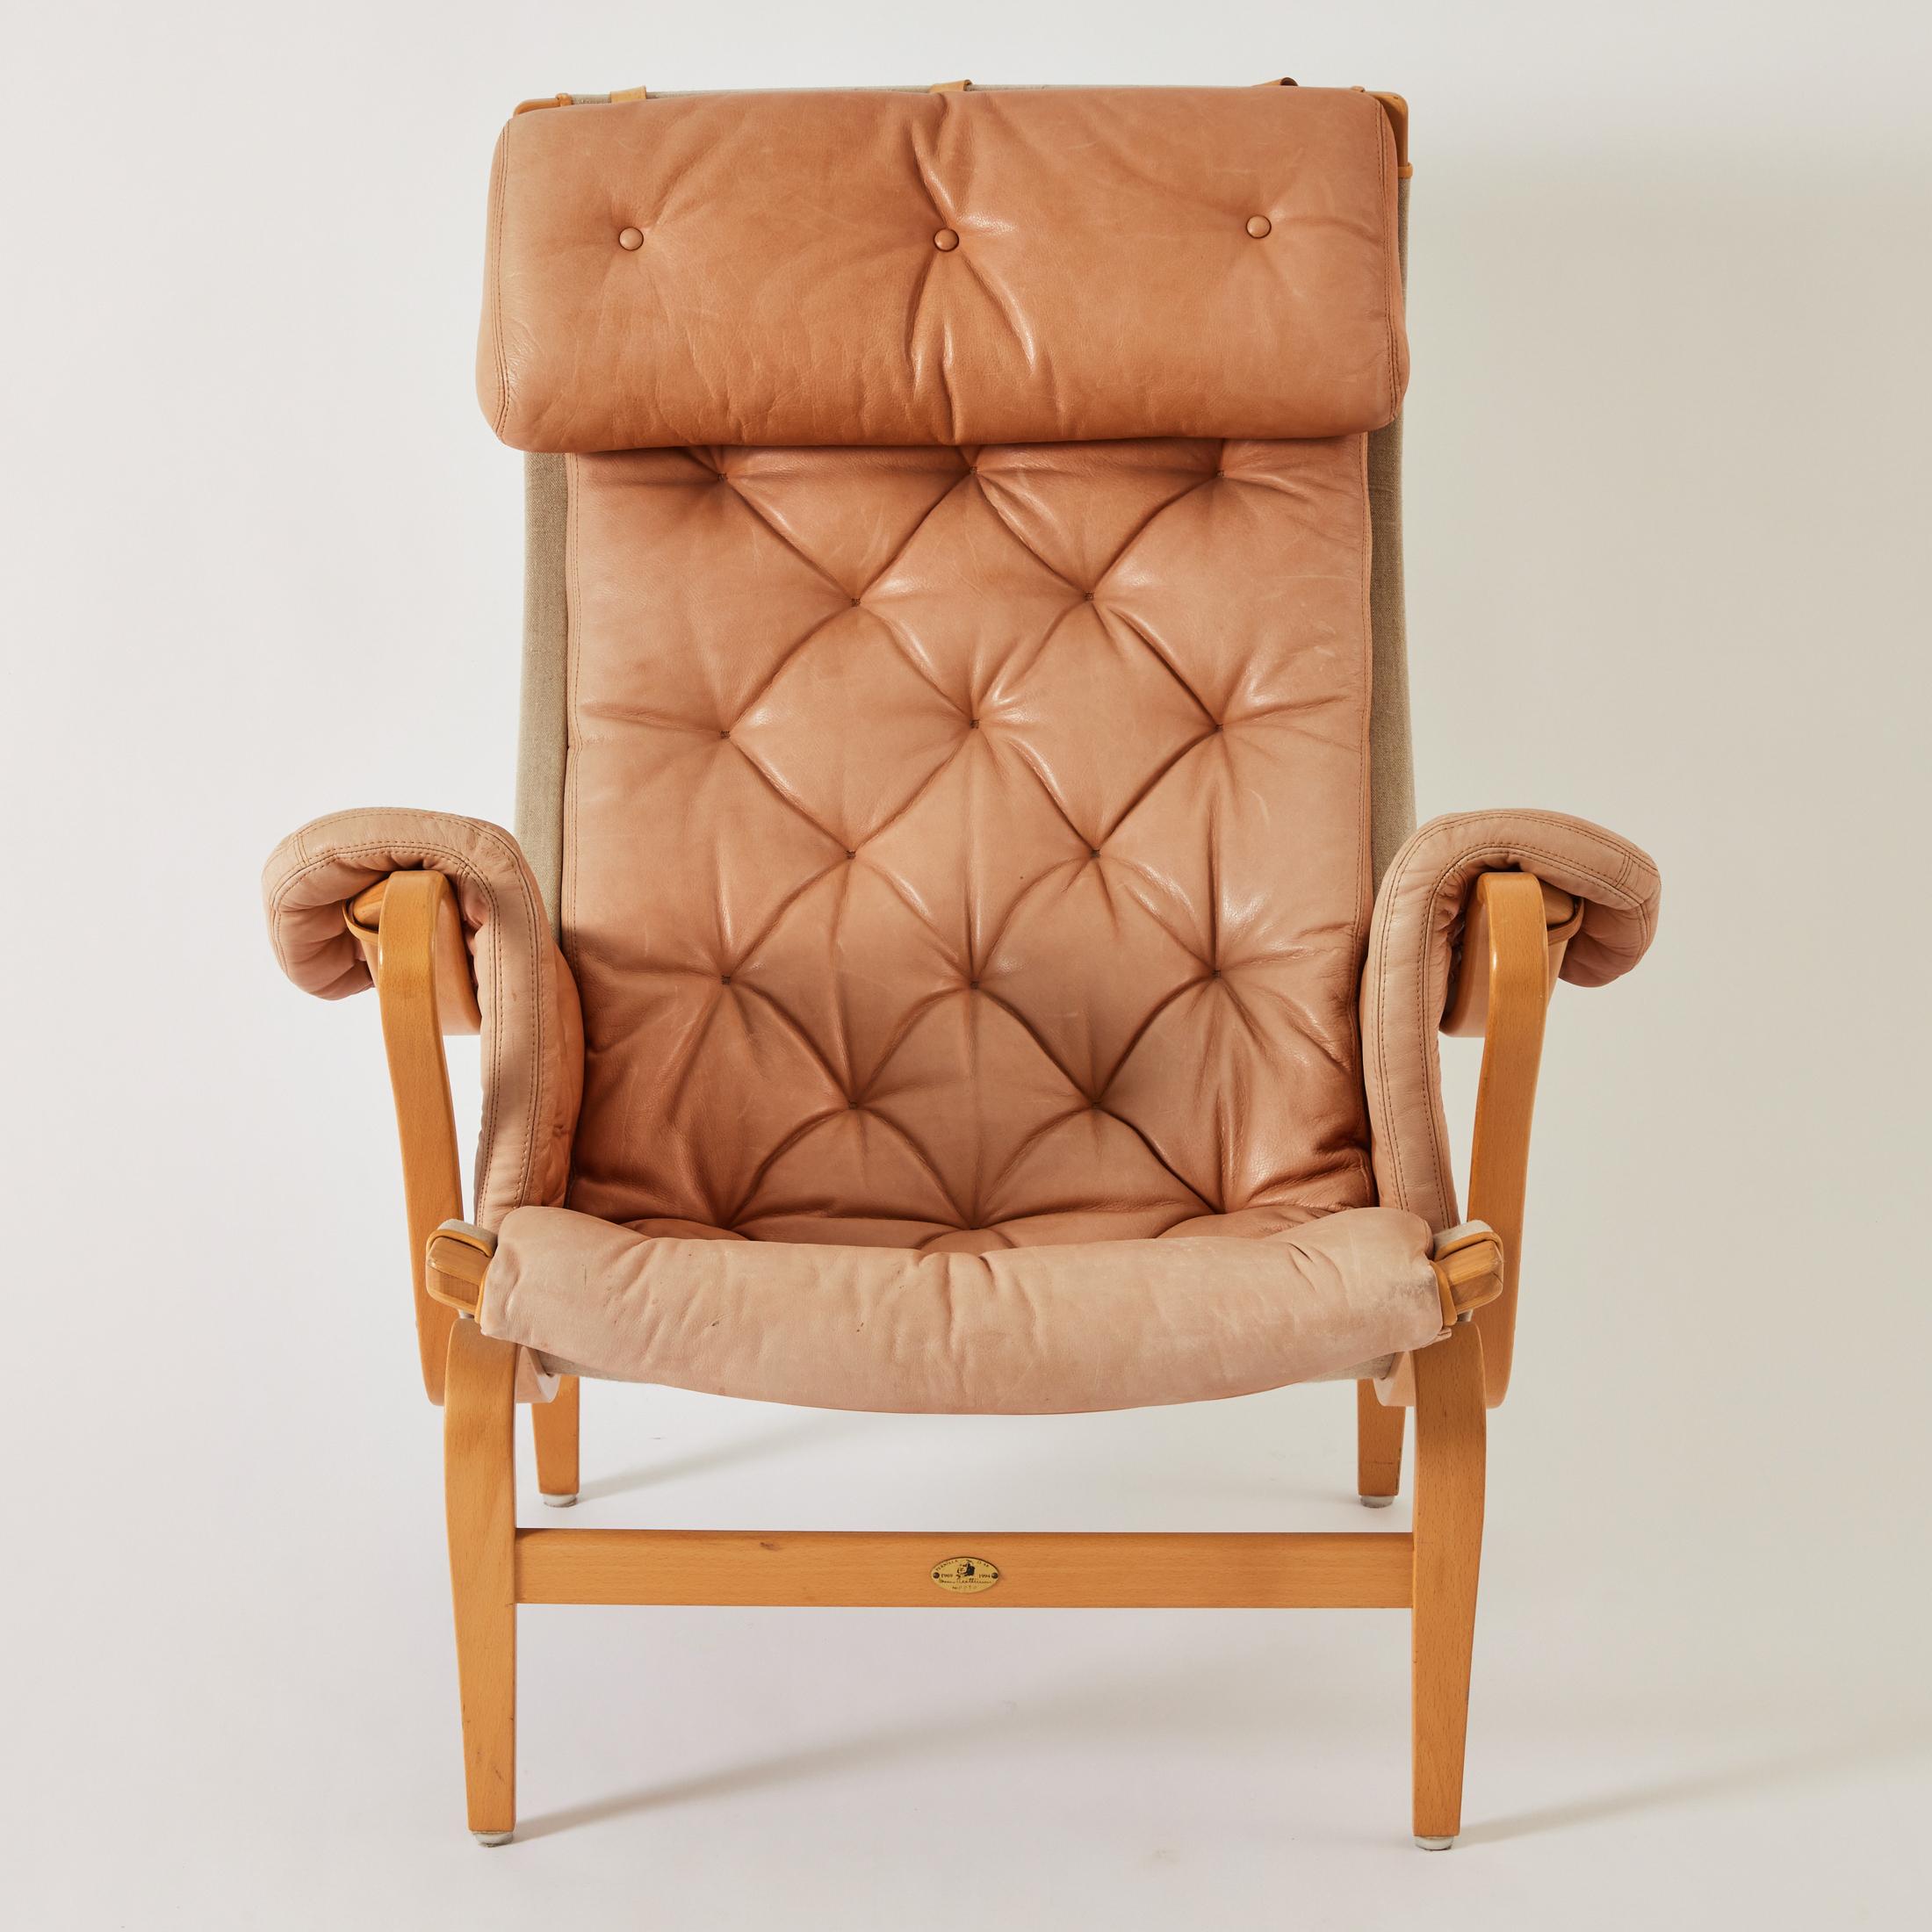 Bruno Mathsson leather Pernilla 69 lounge chair. This particular model was made as part of the 25 year anniversary edition in 1994. The leather has a lovely tonal color and the condition is very good. The curved frame is beech wood and the chair